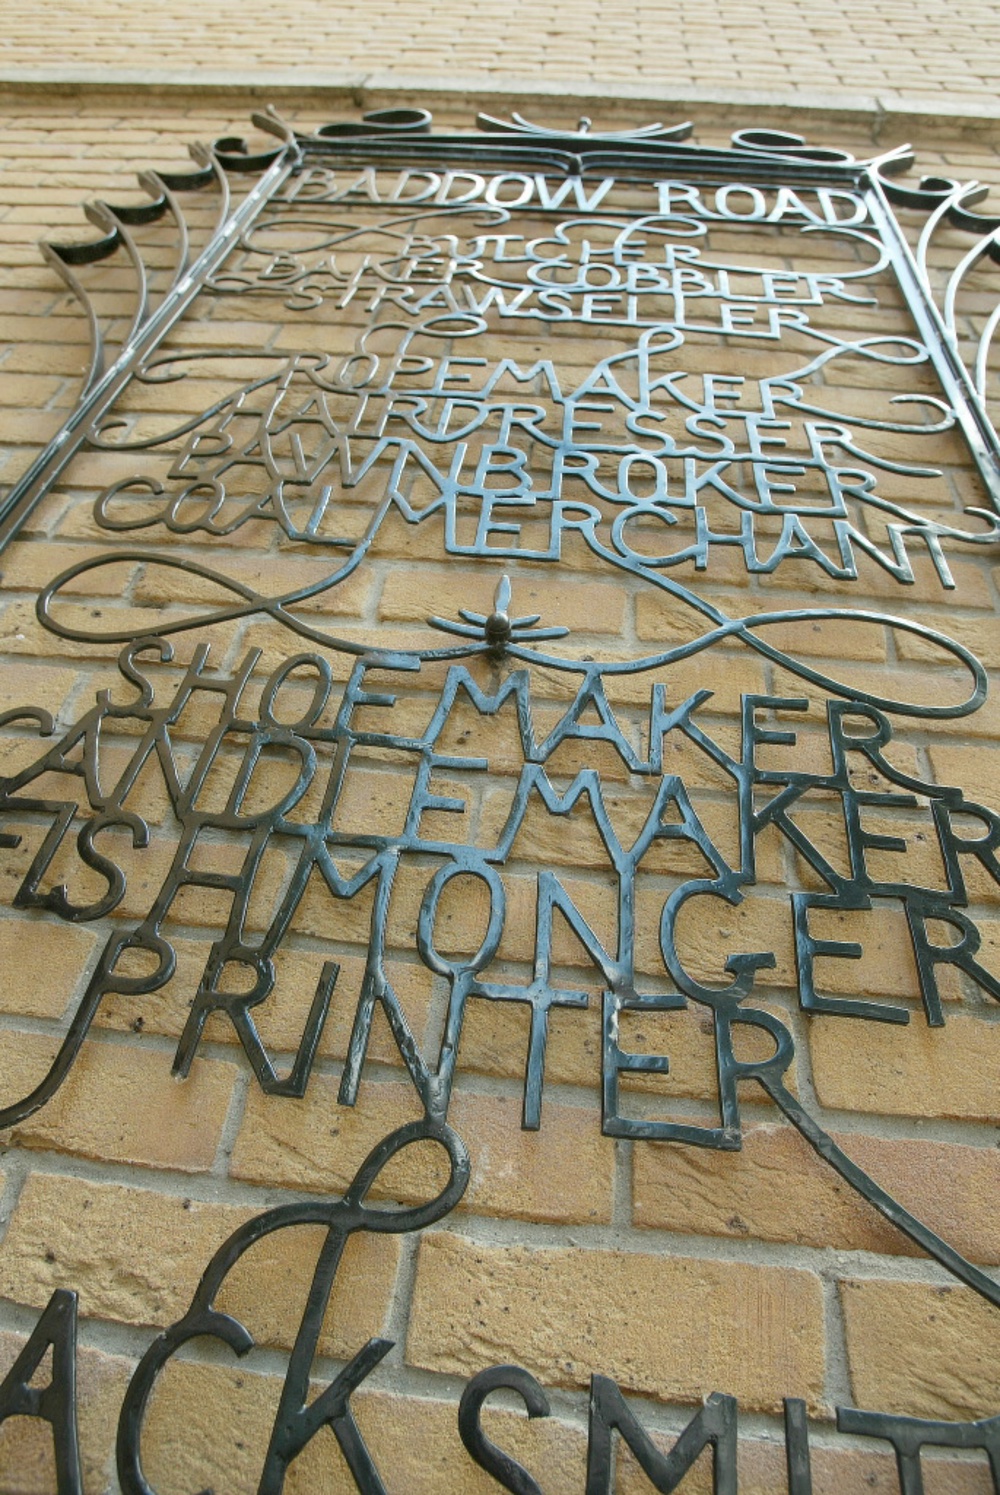 Words formed out of metal to describe local historic trades